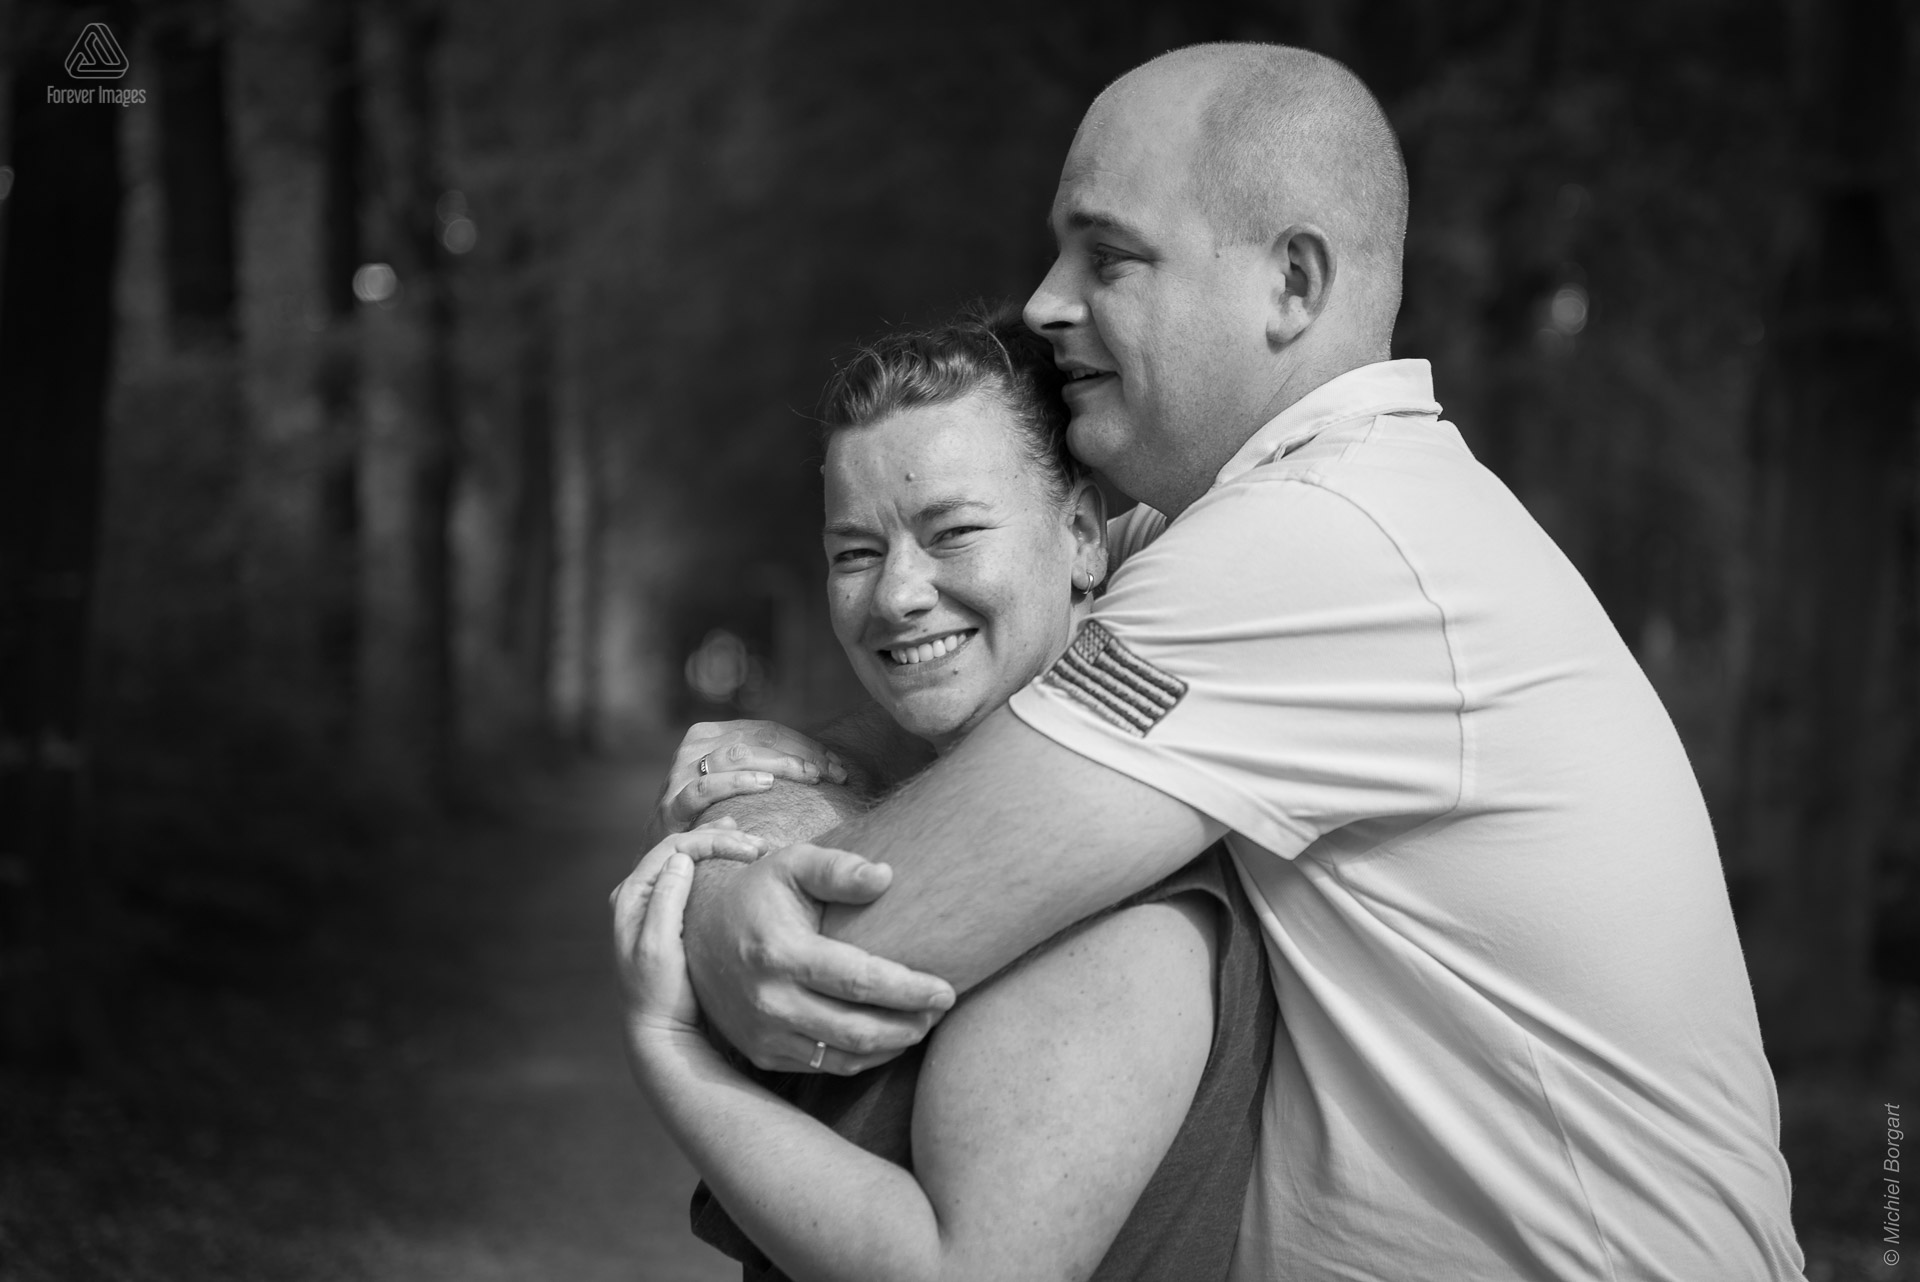 Loveshoot in black and white B&W young married couple in forest | Portrait Photographer Michiel Borgart - Forever Images.